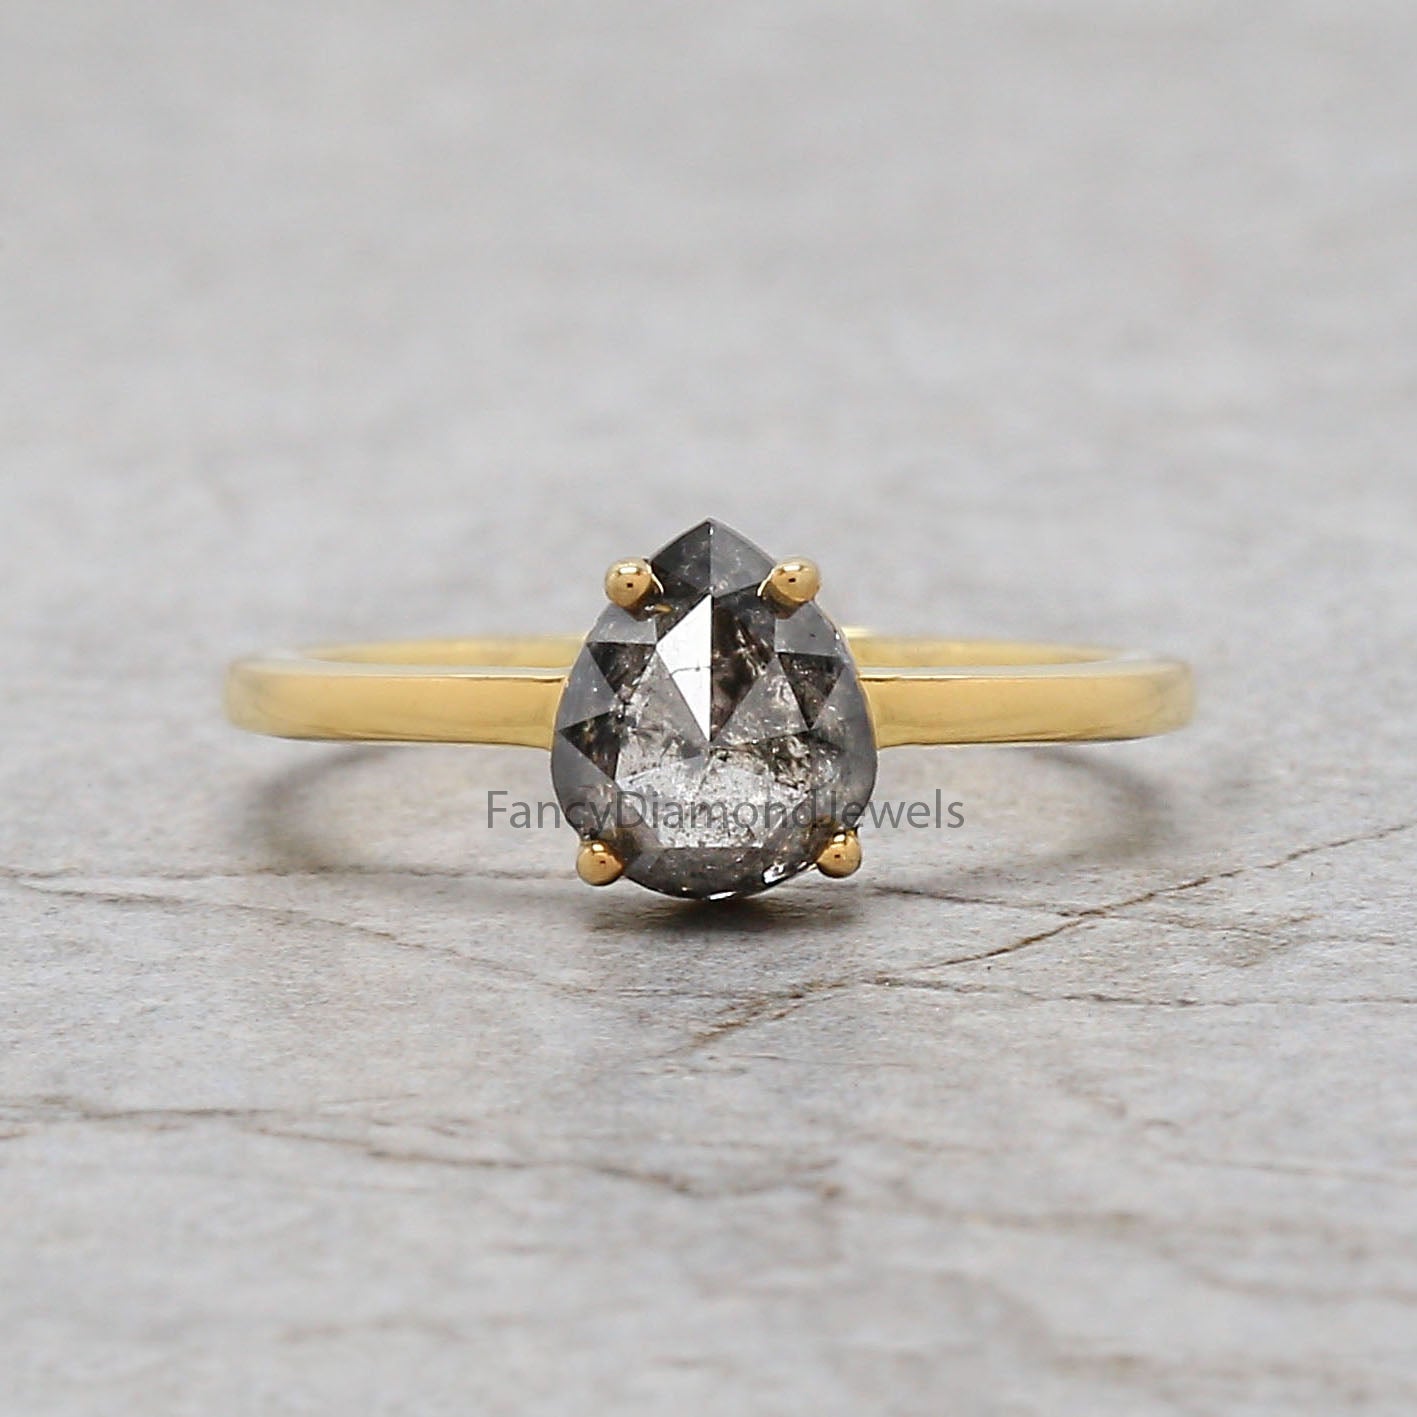 Pear Salt And Pepper Diamond Ring 1.10 Ct 7.30 MM Pear Diamond Ring 14K Solid Yellow Gold Silver Engagement Pear Ring Gift For Her QN1877